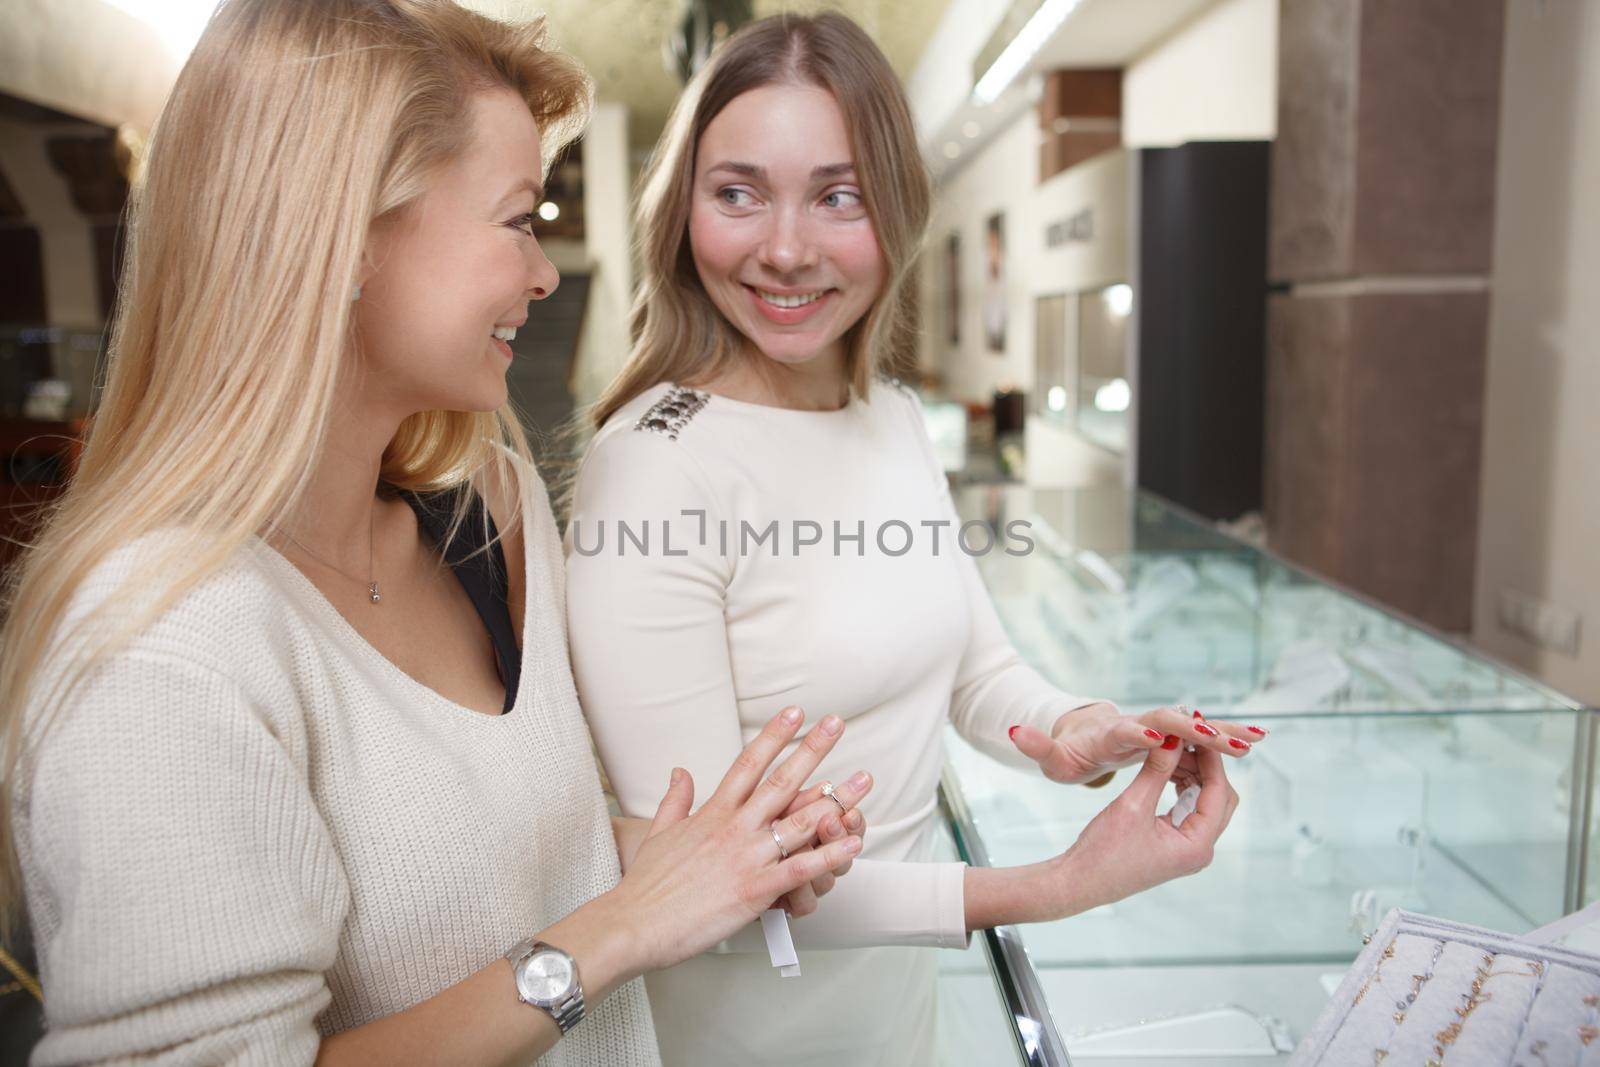 Cheerful woman talking to her friend while choosing jewelry to buy